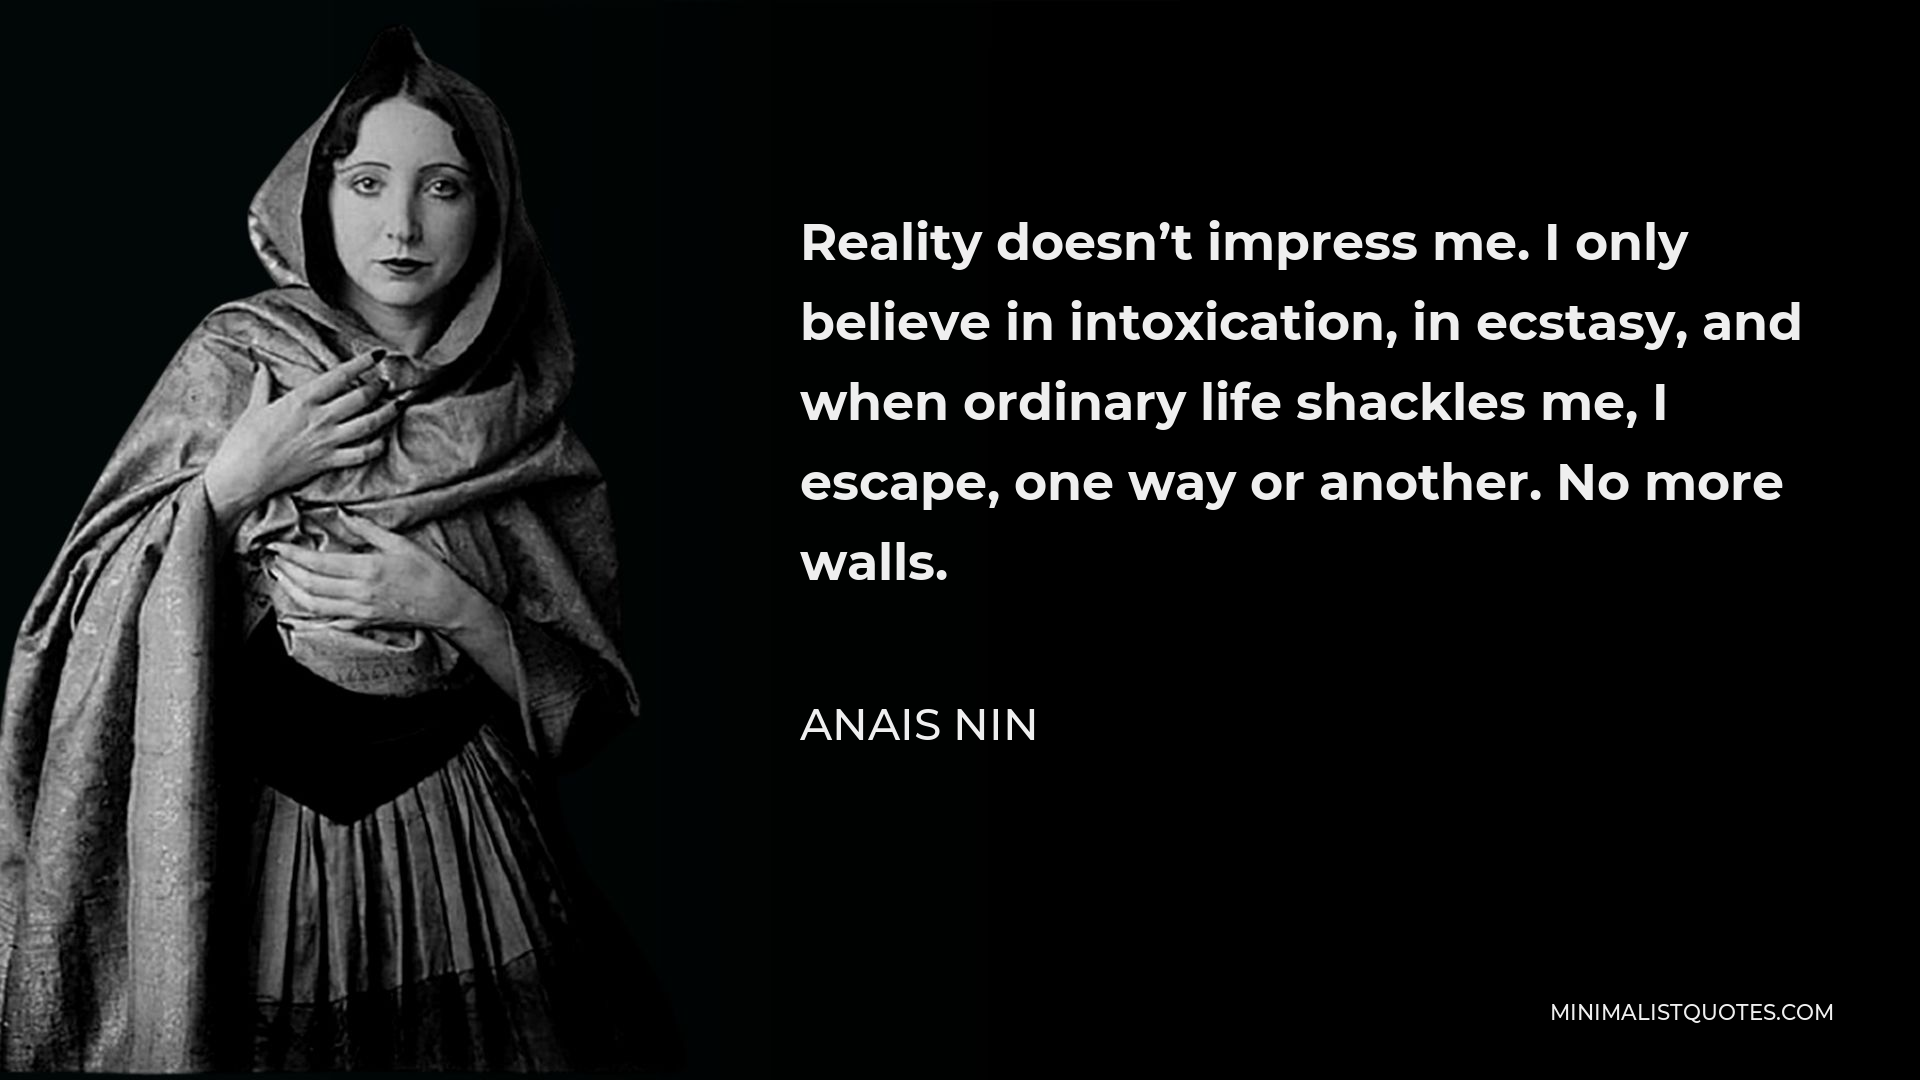 Anais Nin Quote - Reality doesn’t impress me. I only believe in intoxication, in ecstasy, and when ordinary life shackles me, I escape, one way or another. No more walls.